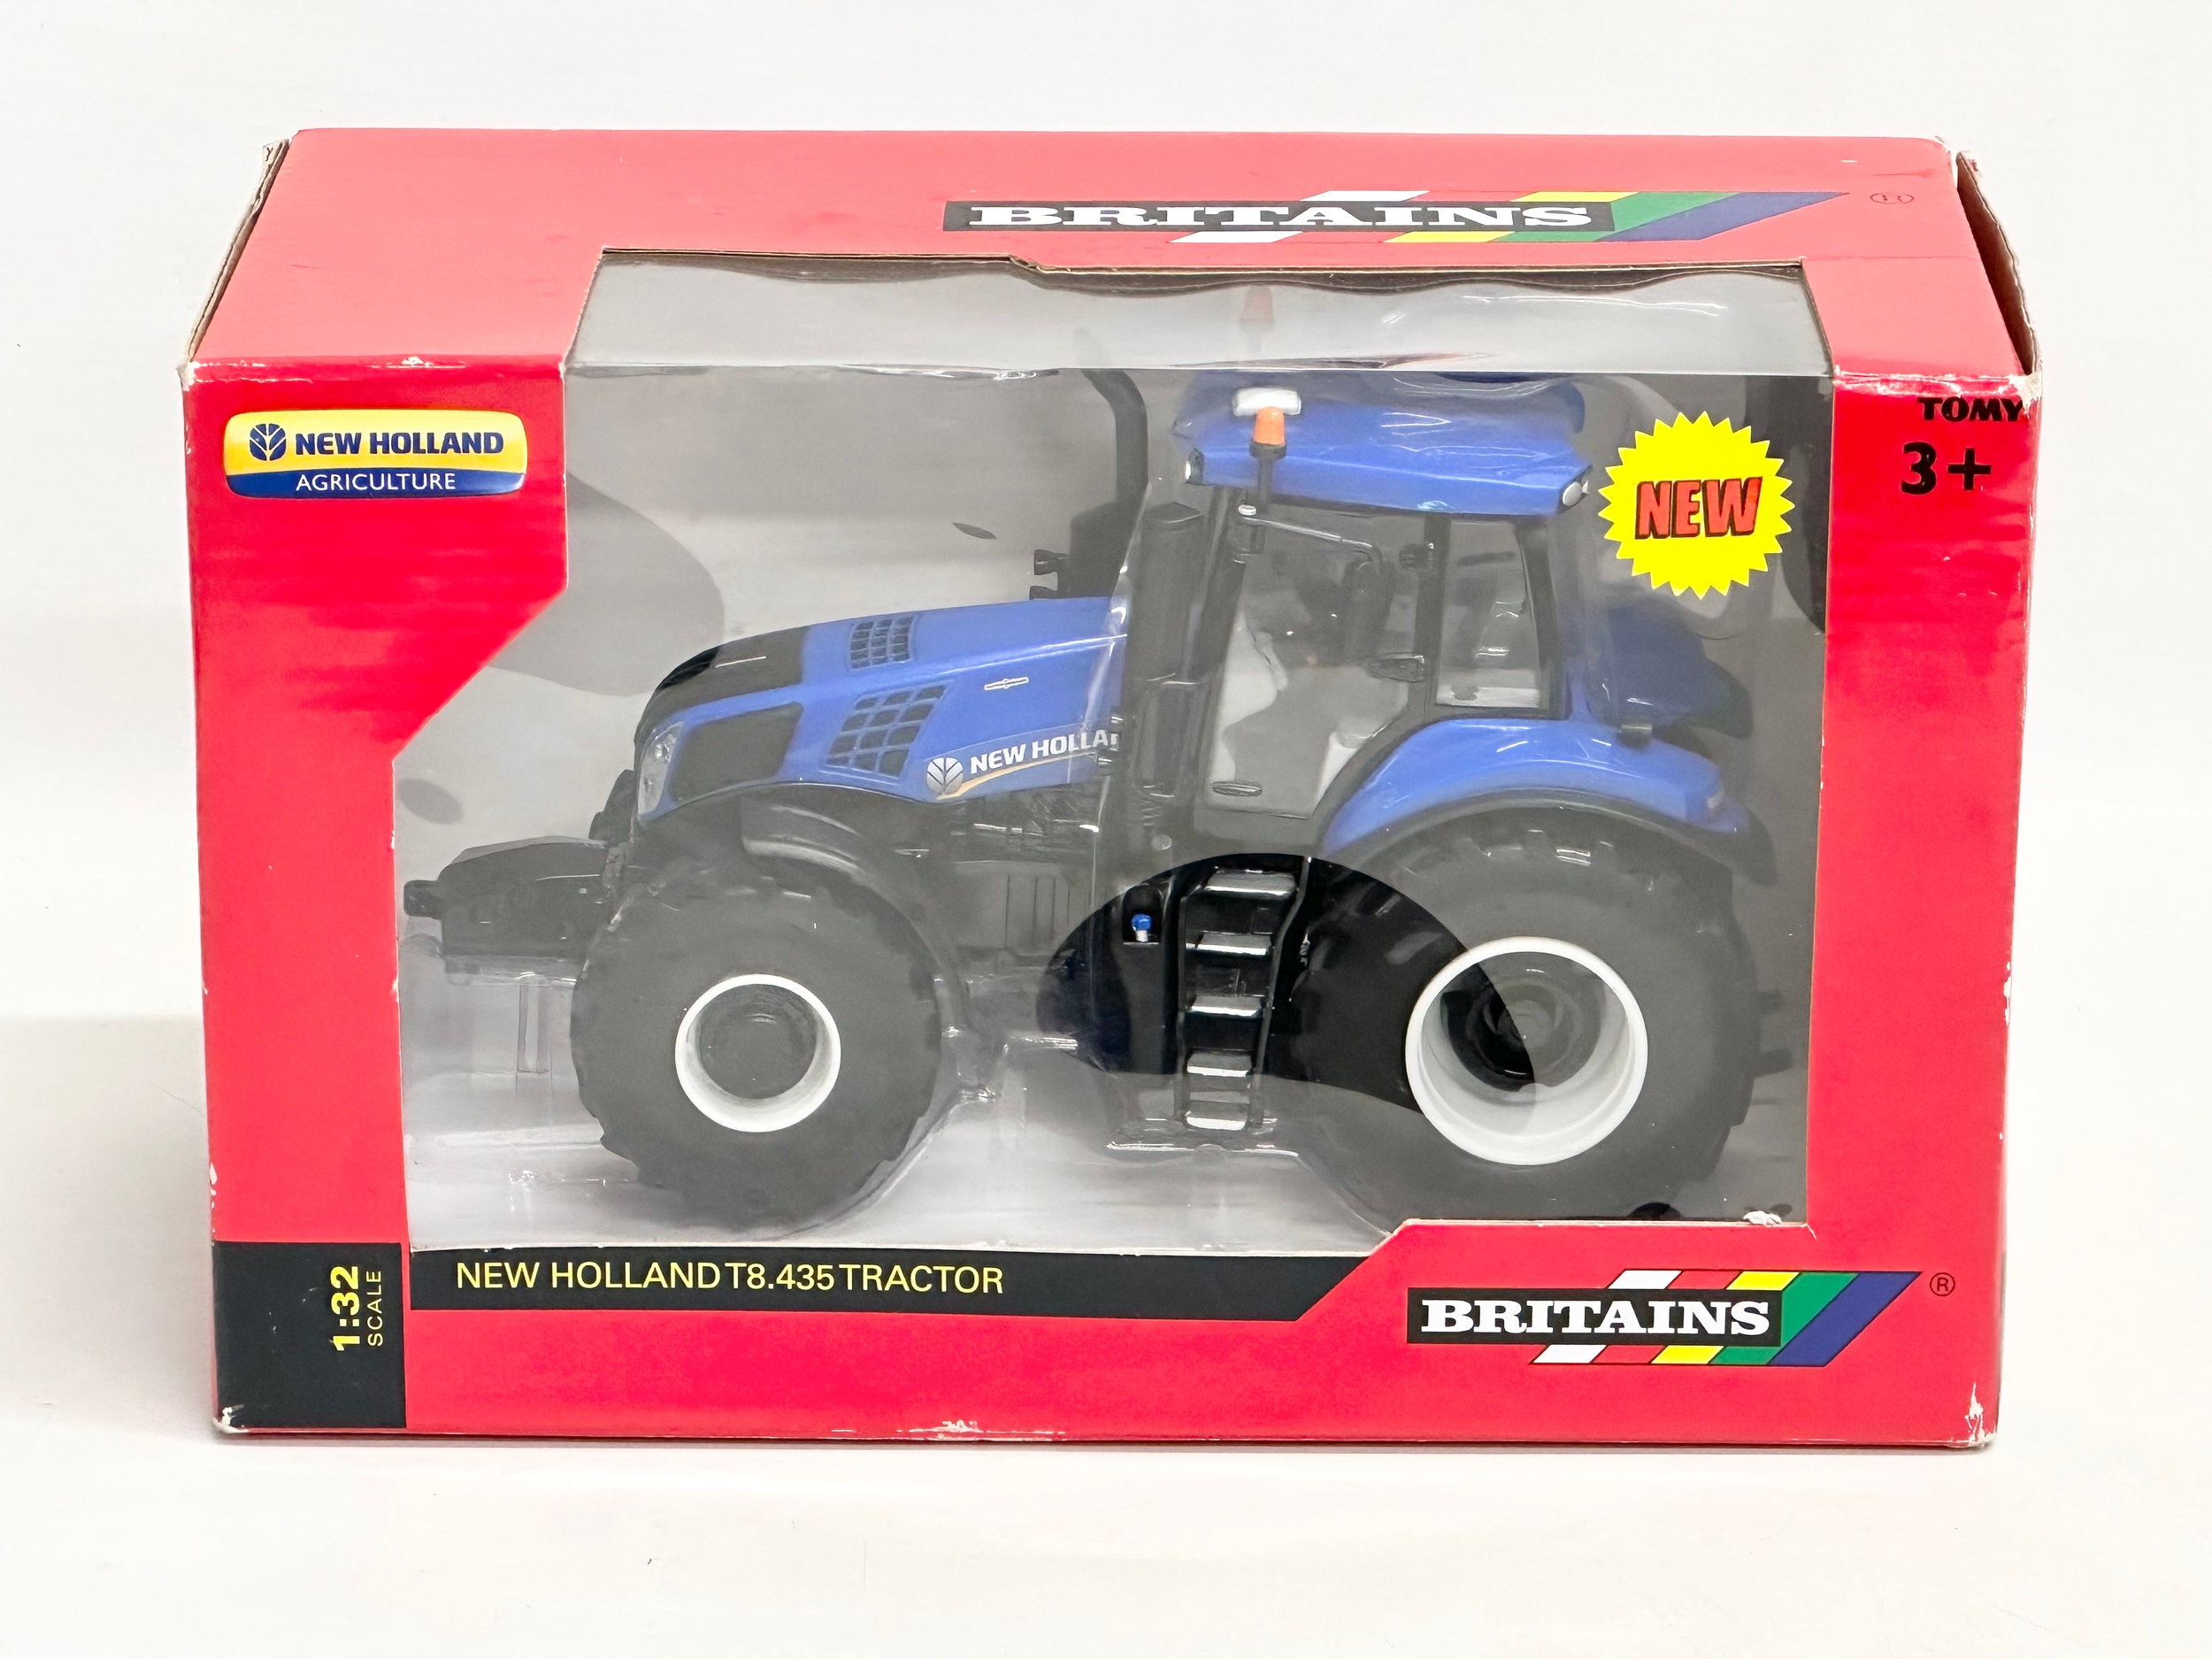 A new Britains New Holland T8.435 Tractor with box. 25x13x16cm